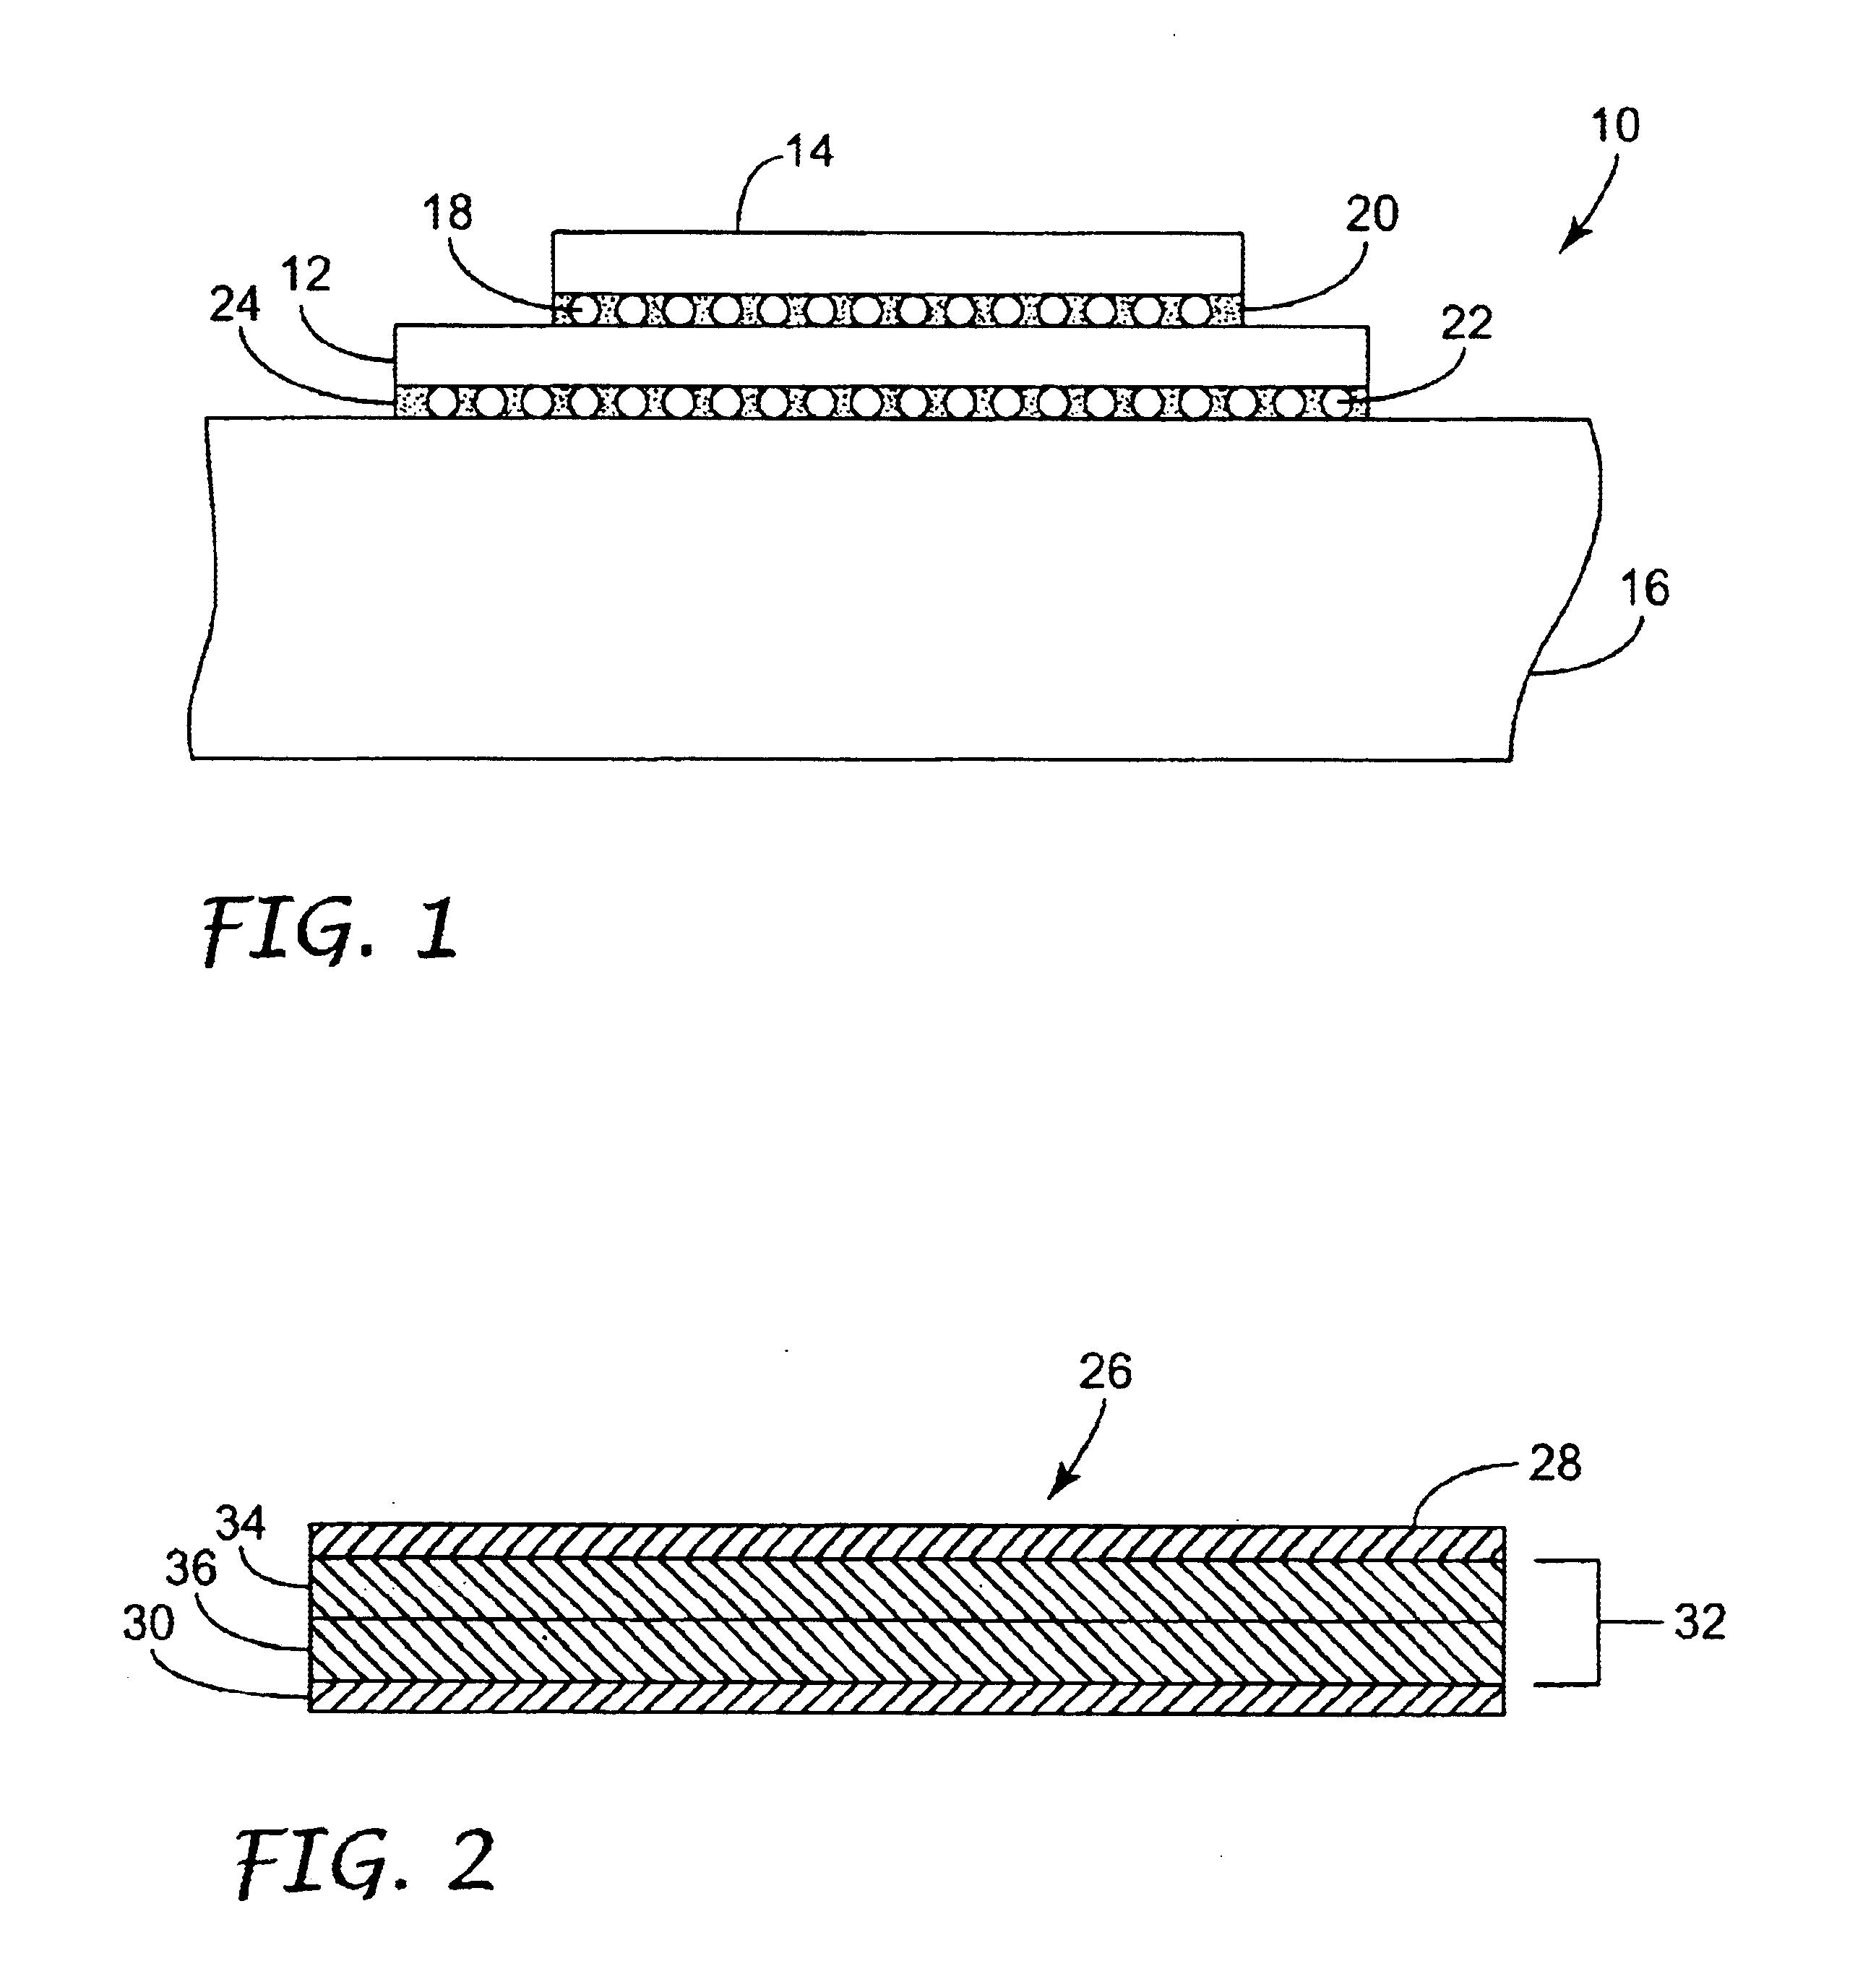 Interconnect module with reduced power distribution impedance